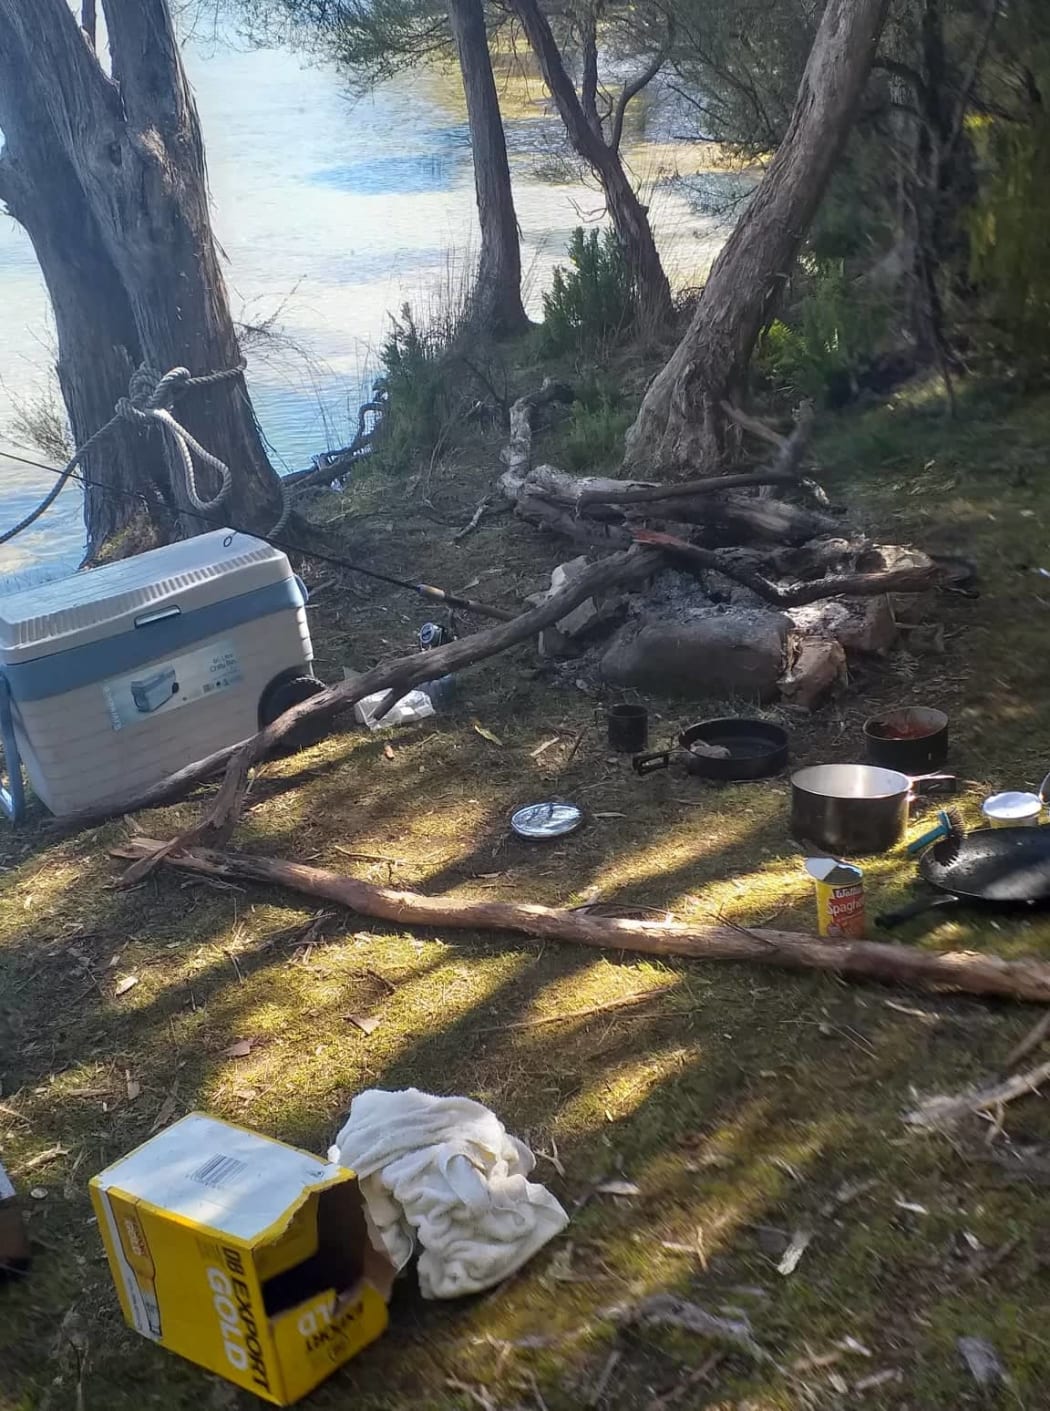 Several rubbished-strewn campsites were found over Labour Weekend on the lake shore, under the Panekire Ranges, included large fire sites near native bush, lots of ground cleared and native bush cut down for firewood.